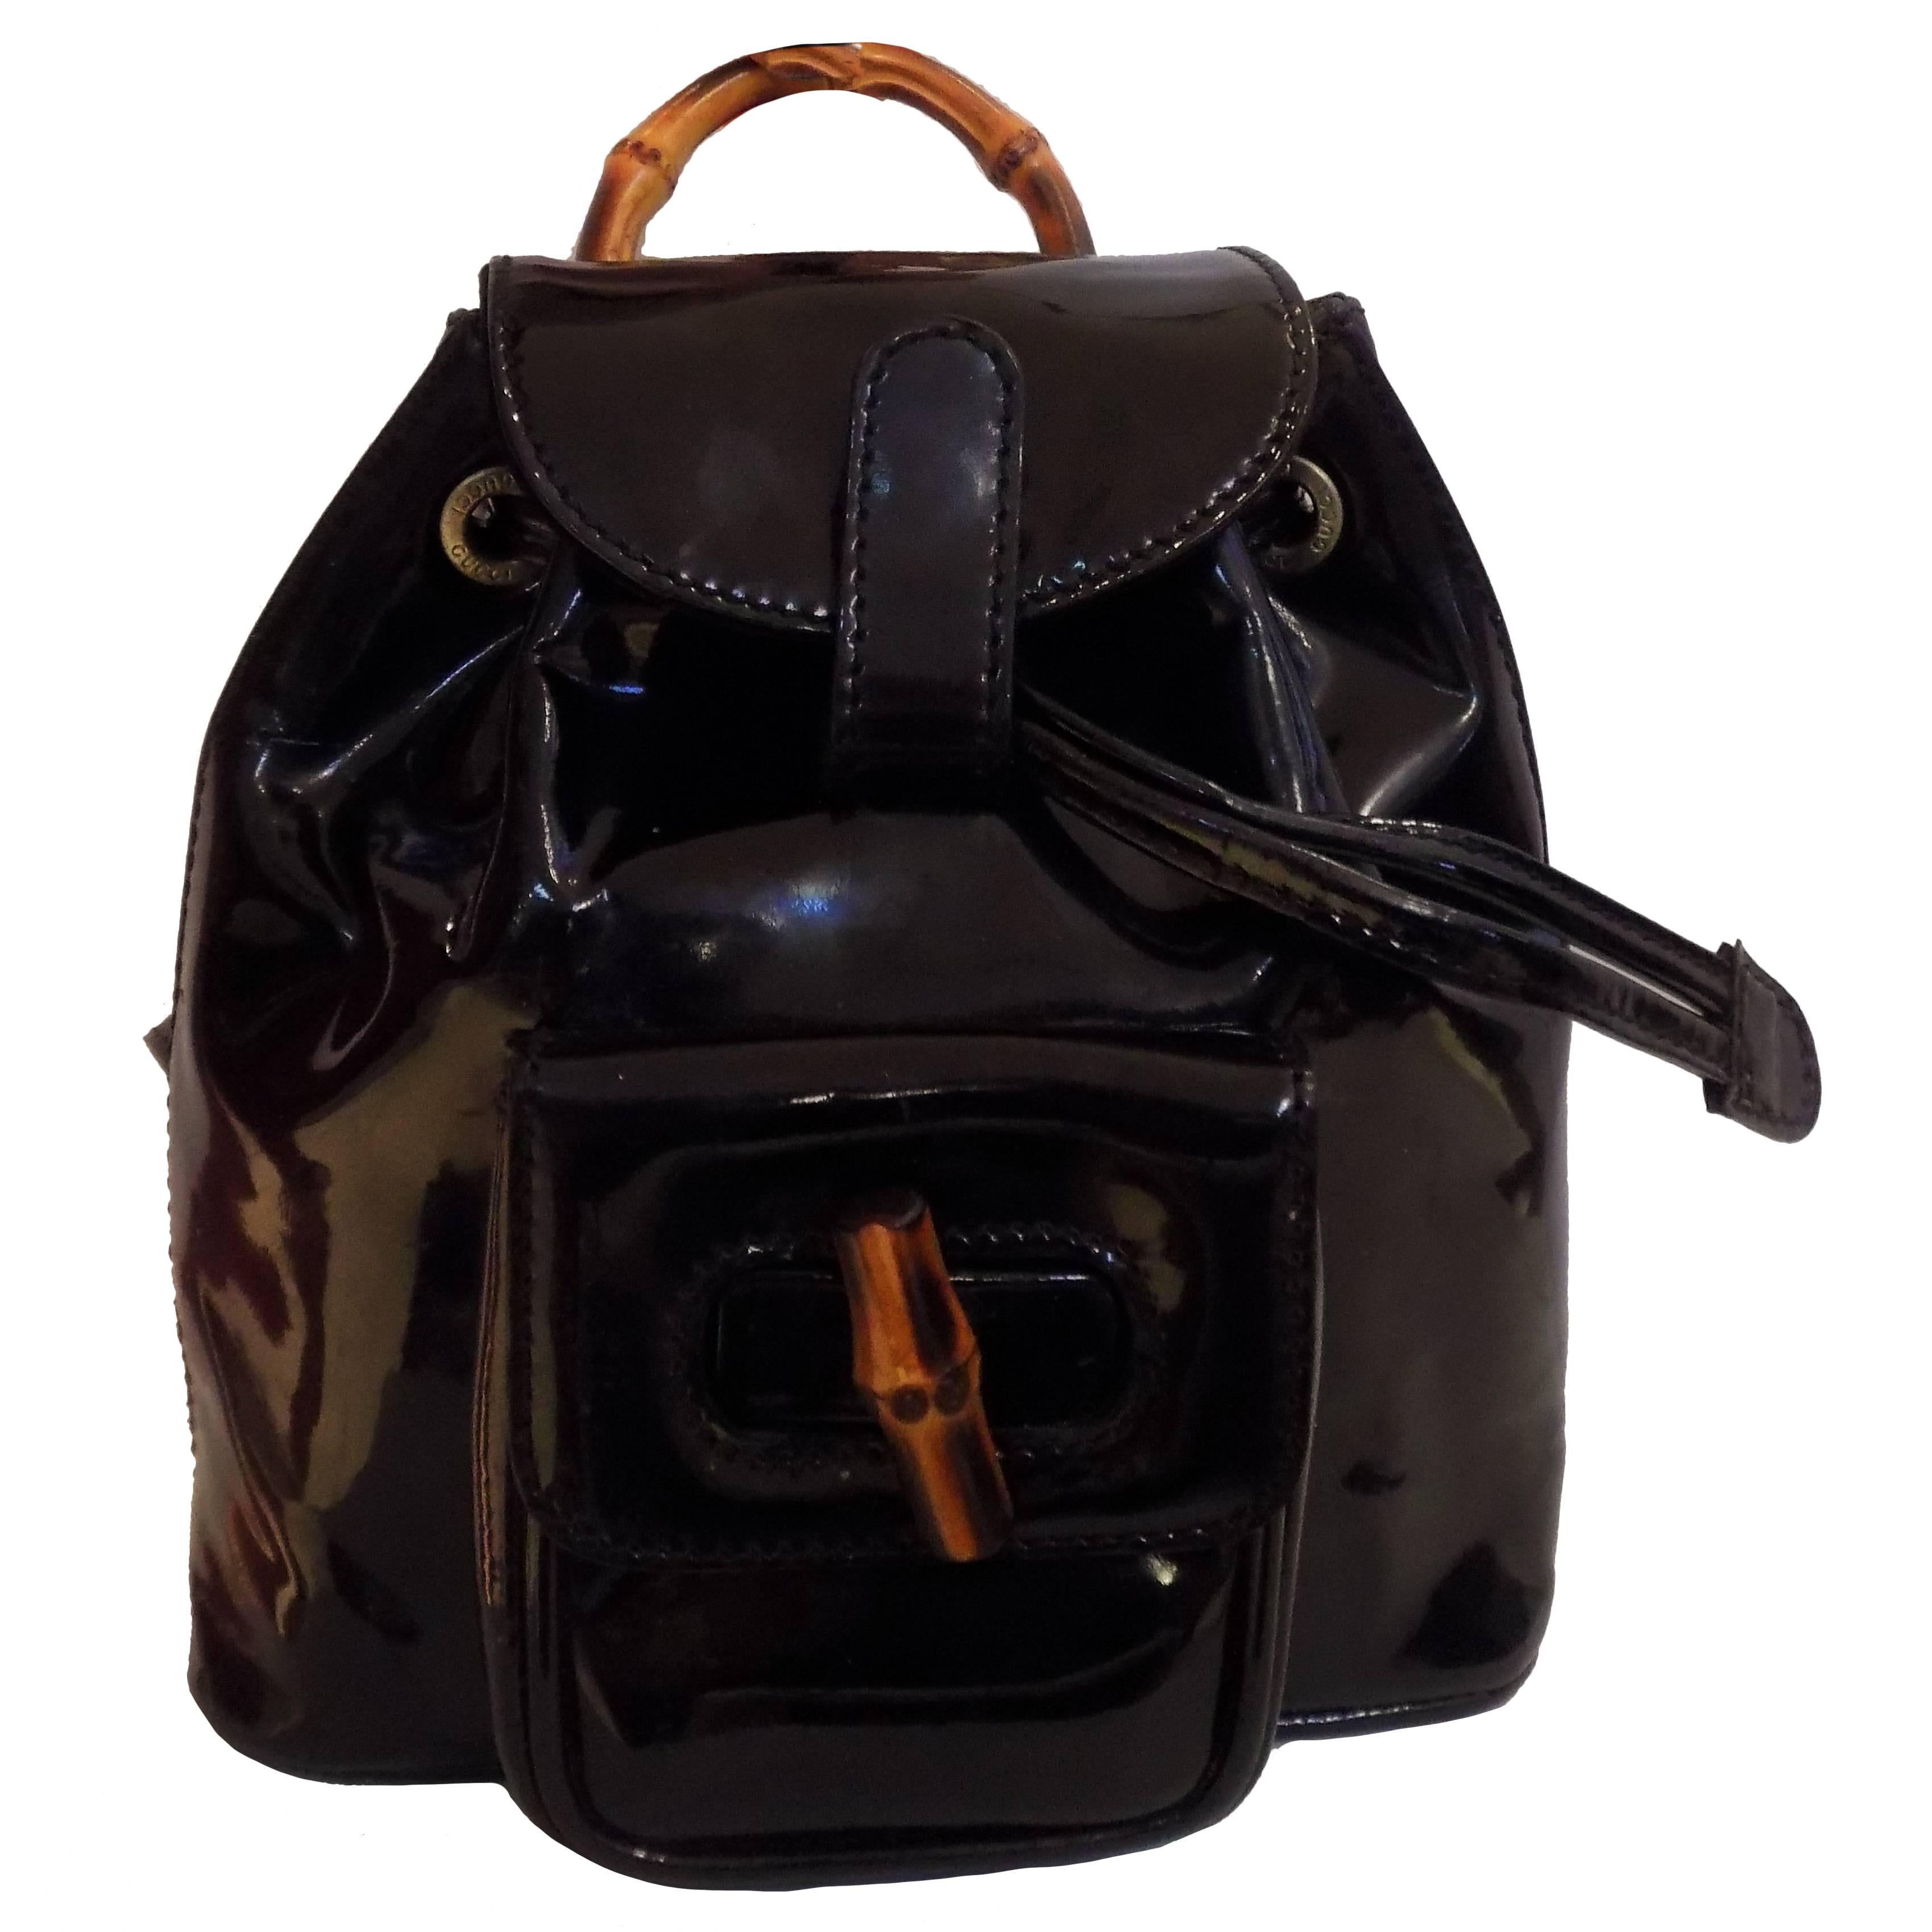 Gucci Bamboo Black Varnish Leather Small Backpack